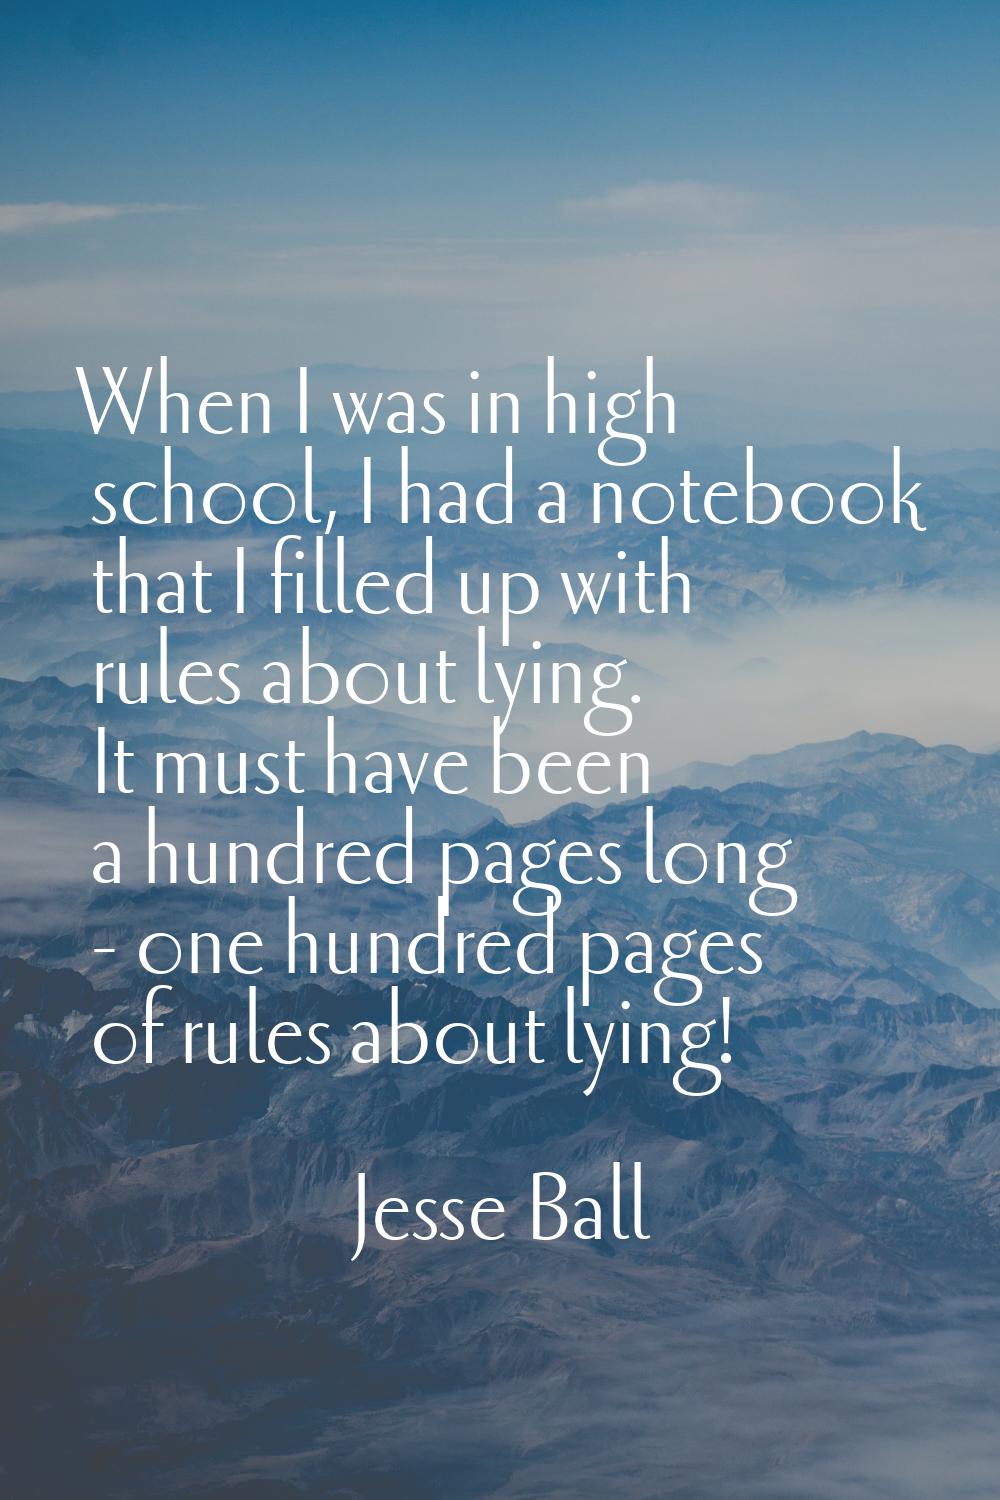 When I was in high school, I had a notebook that I filled up with rules about lying. It must have b